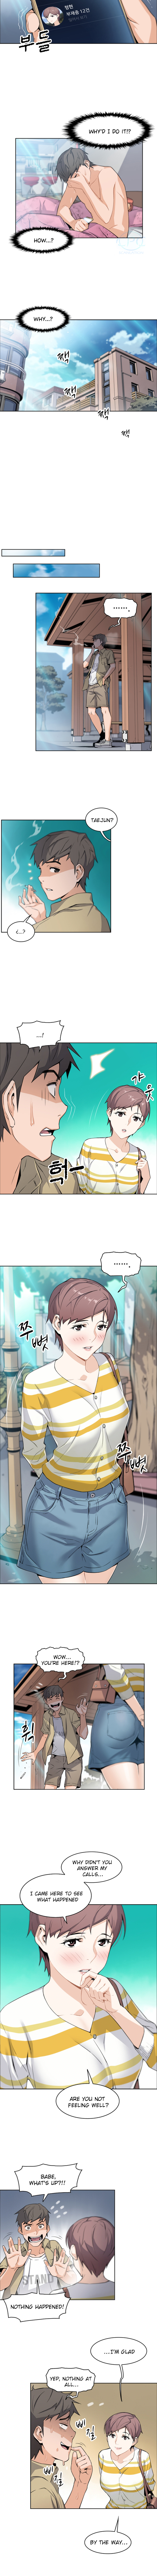 Housekeeper Manhwa - Chapter 2 Page 10